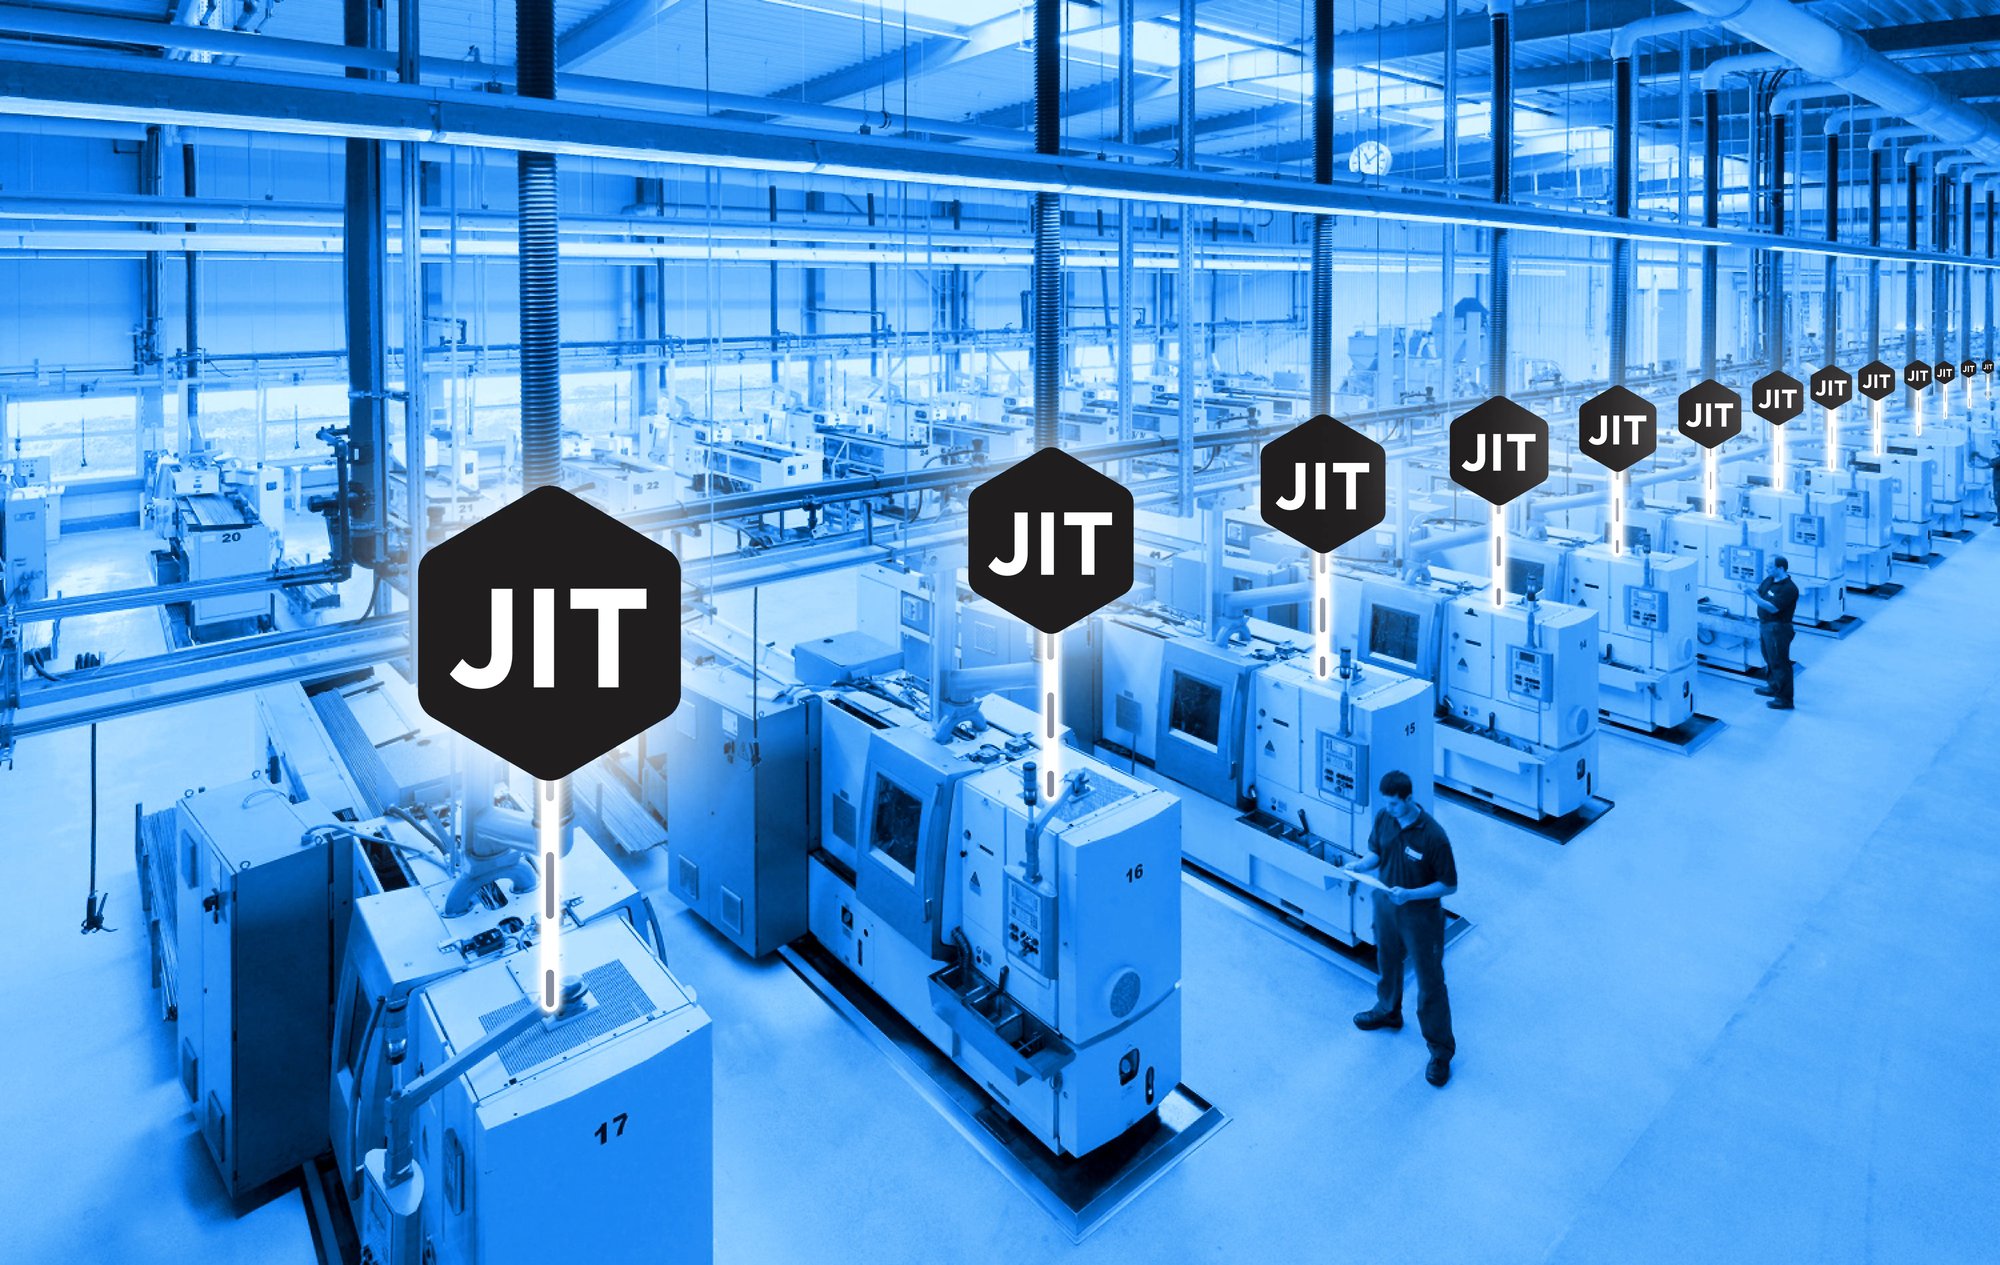 Factory of the future running lights-out operations. Machines are connected with JITbase.